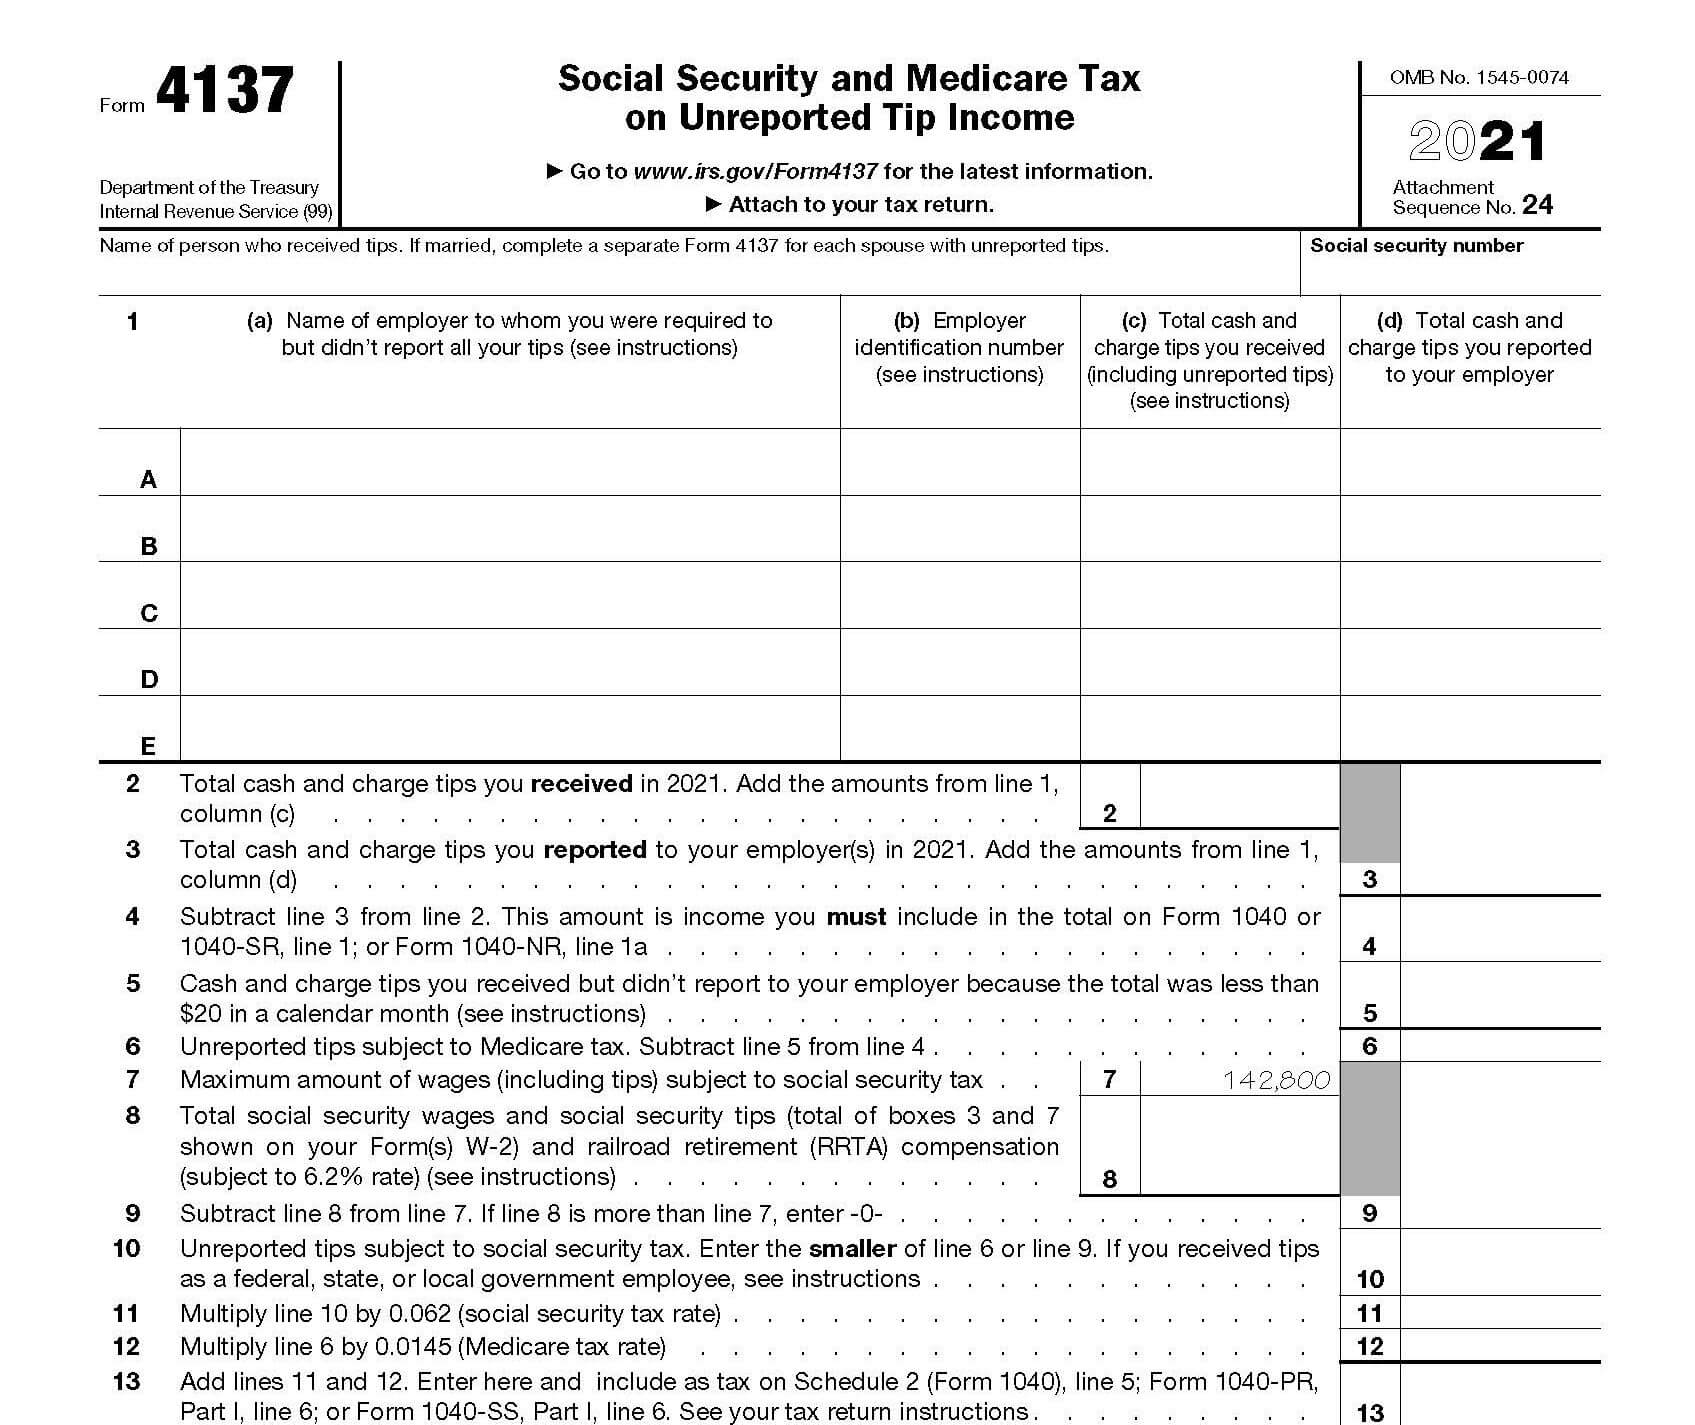 irs form-4137 example